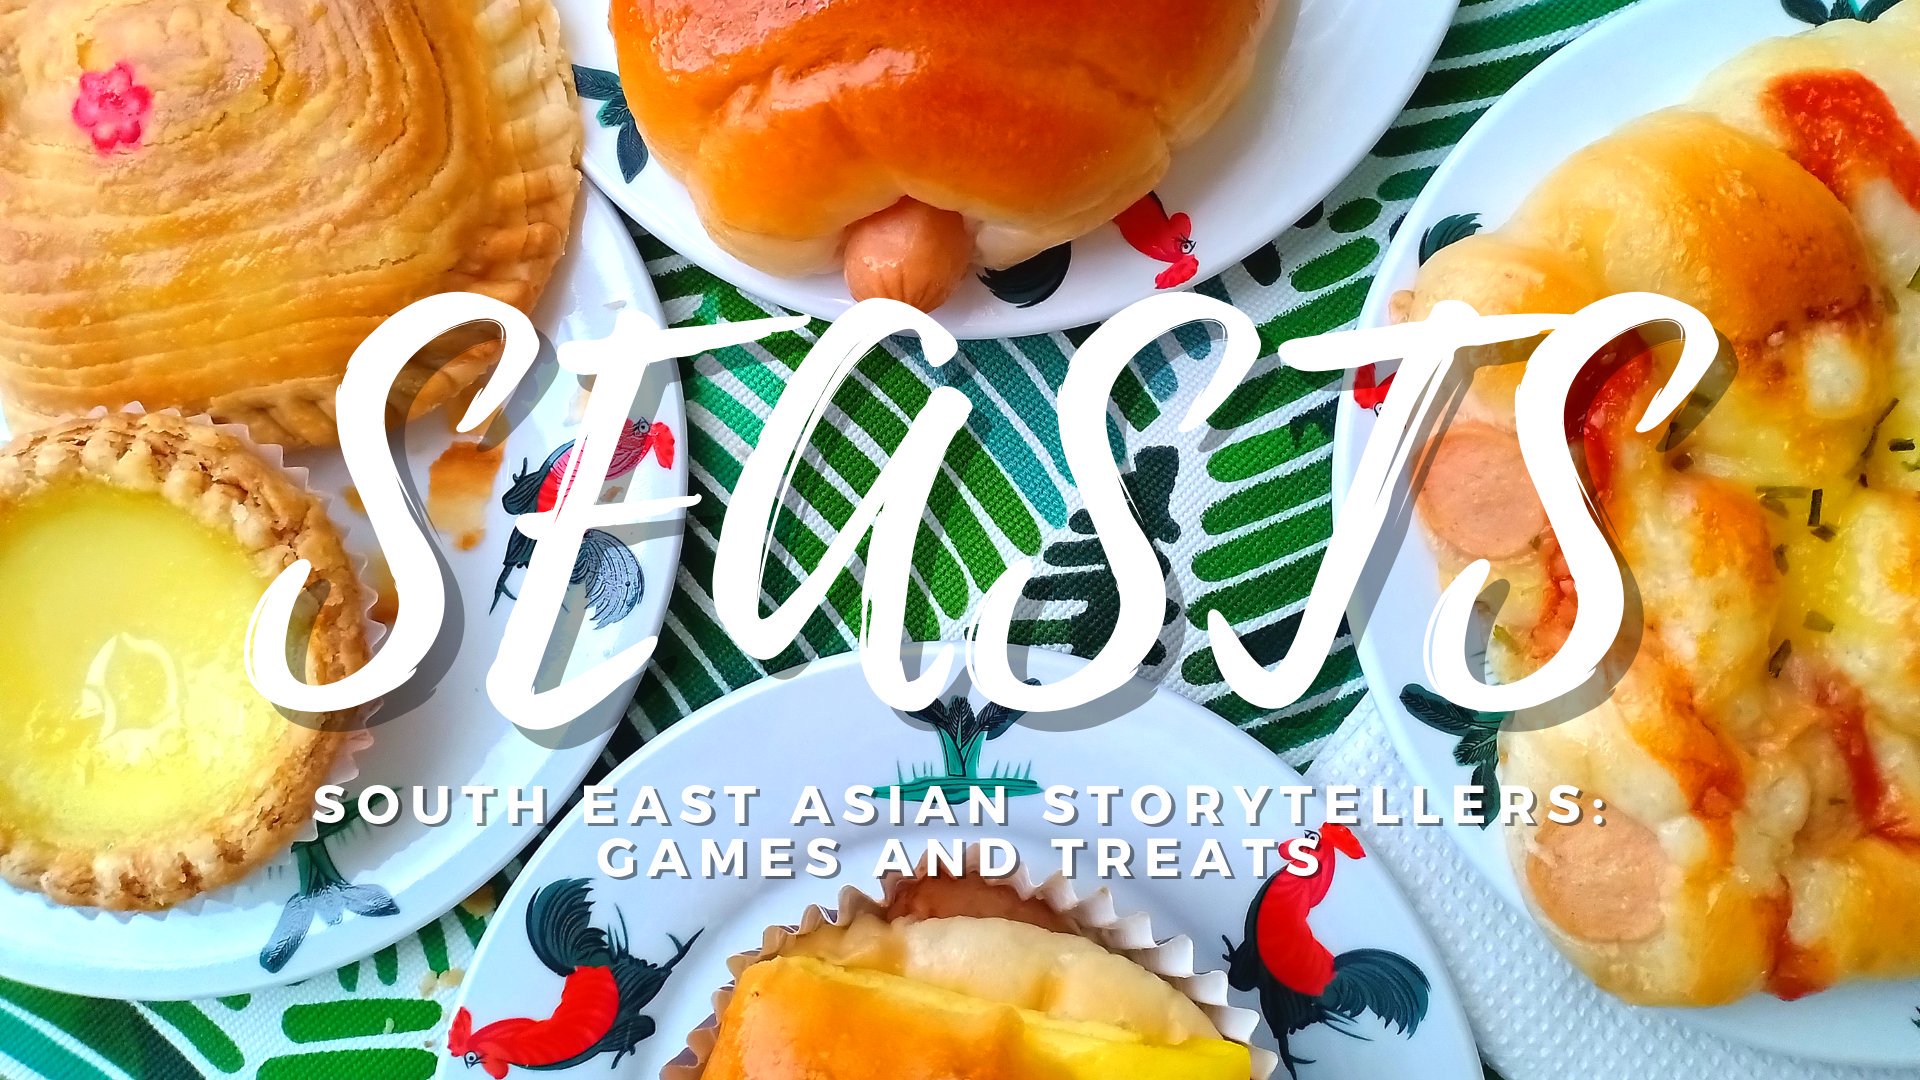 SEASts (South East Asian Storytellers): Games and Treats